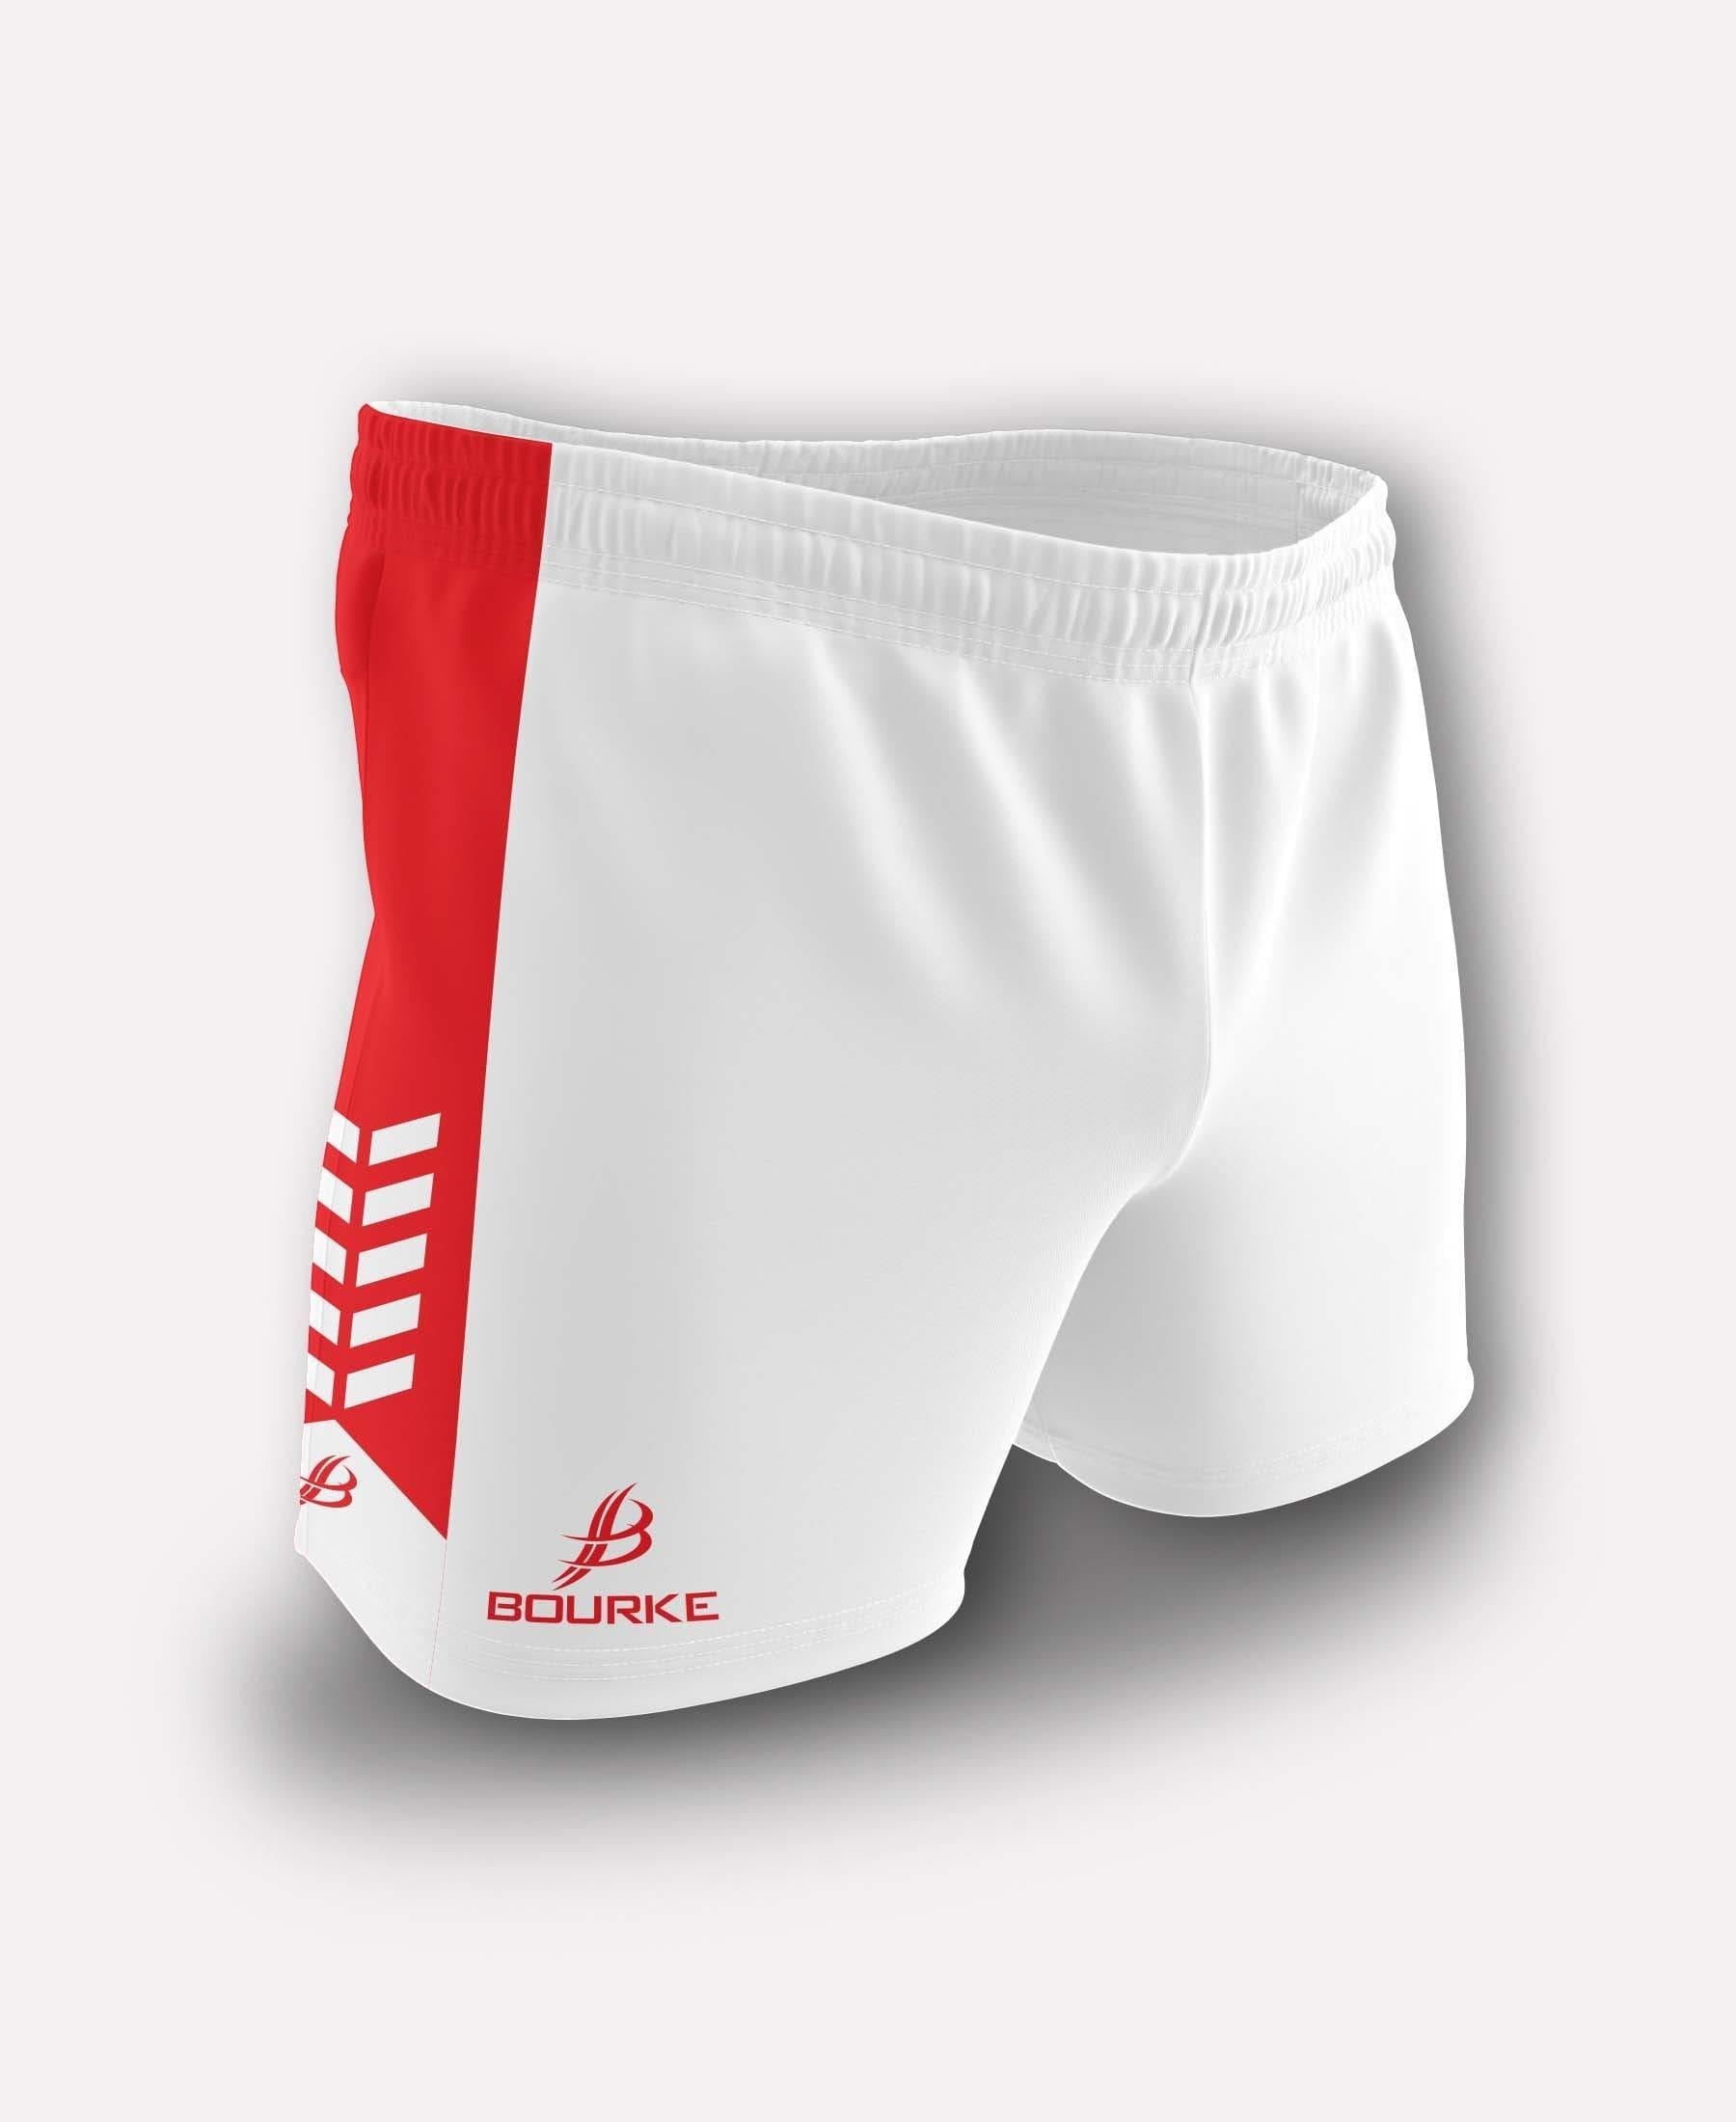 Chevron Adult Shorts (White/Red) - Bourke Sports Limited